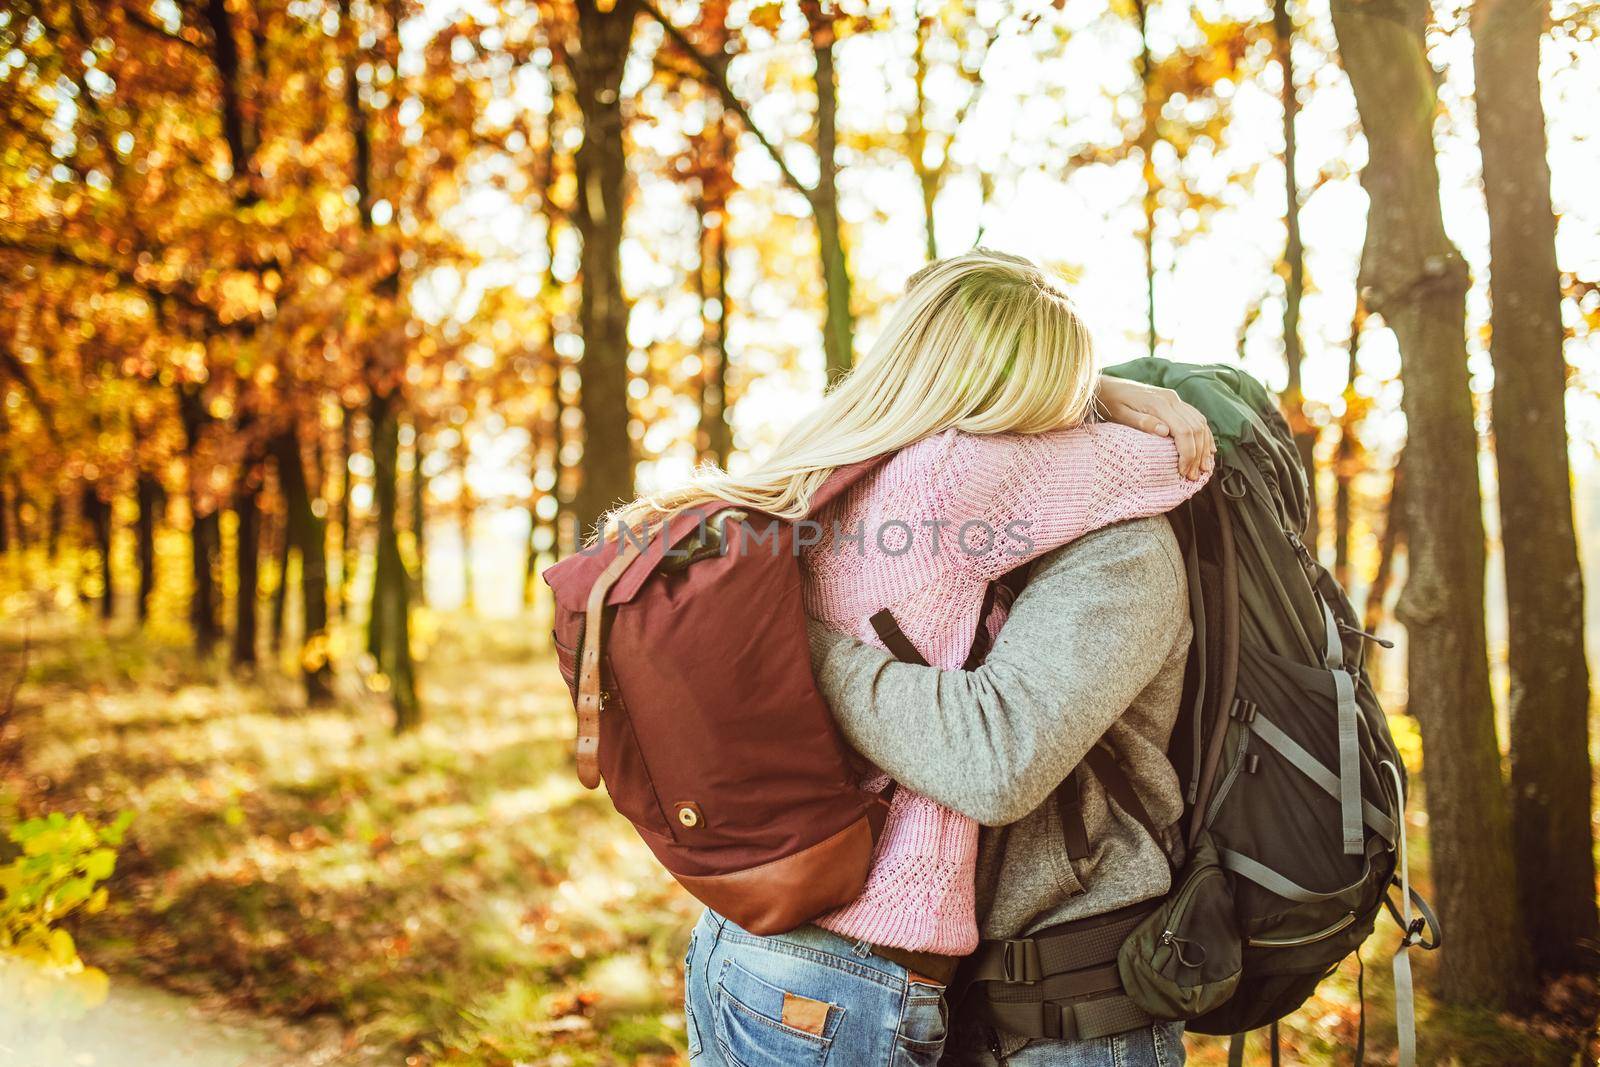 Embrace of couple of travelers, Man and woman with backpacks hugging while standing in the autumn forest. Copy space at left side.